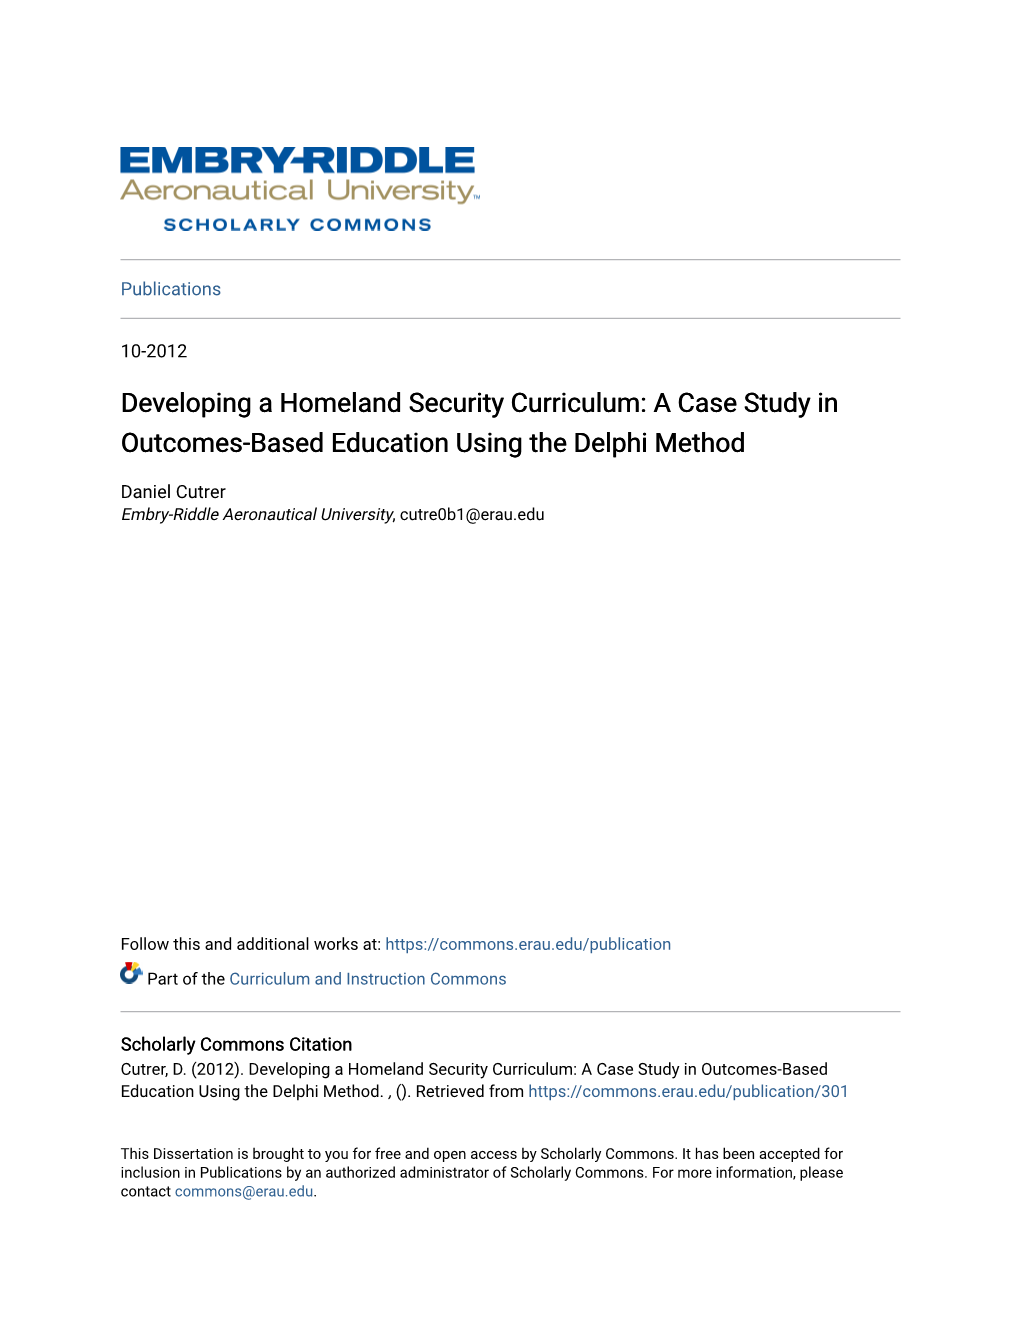 Developing a Homeland Security Curriculum: a Case Study in Outcomes-Based Education Using the Delphi Method